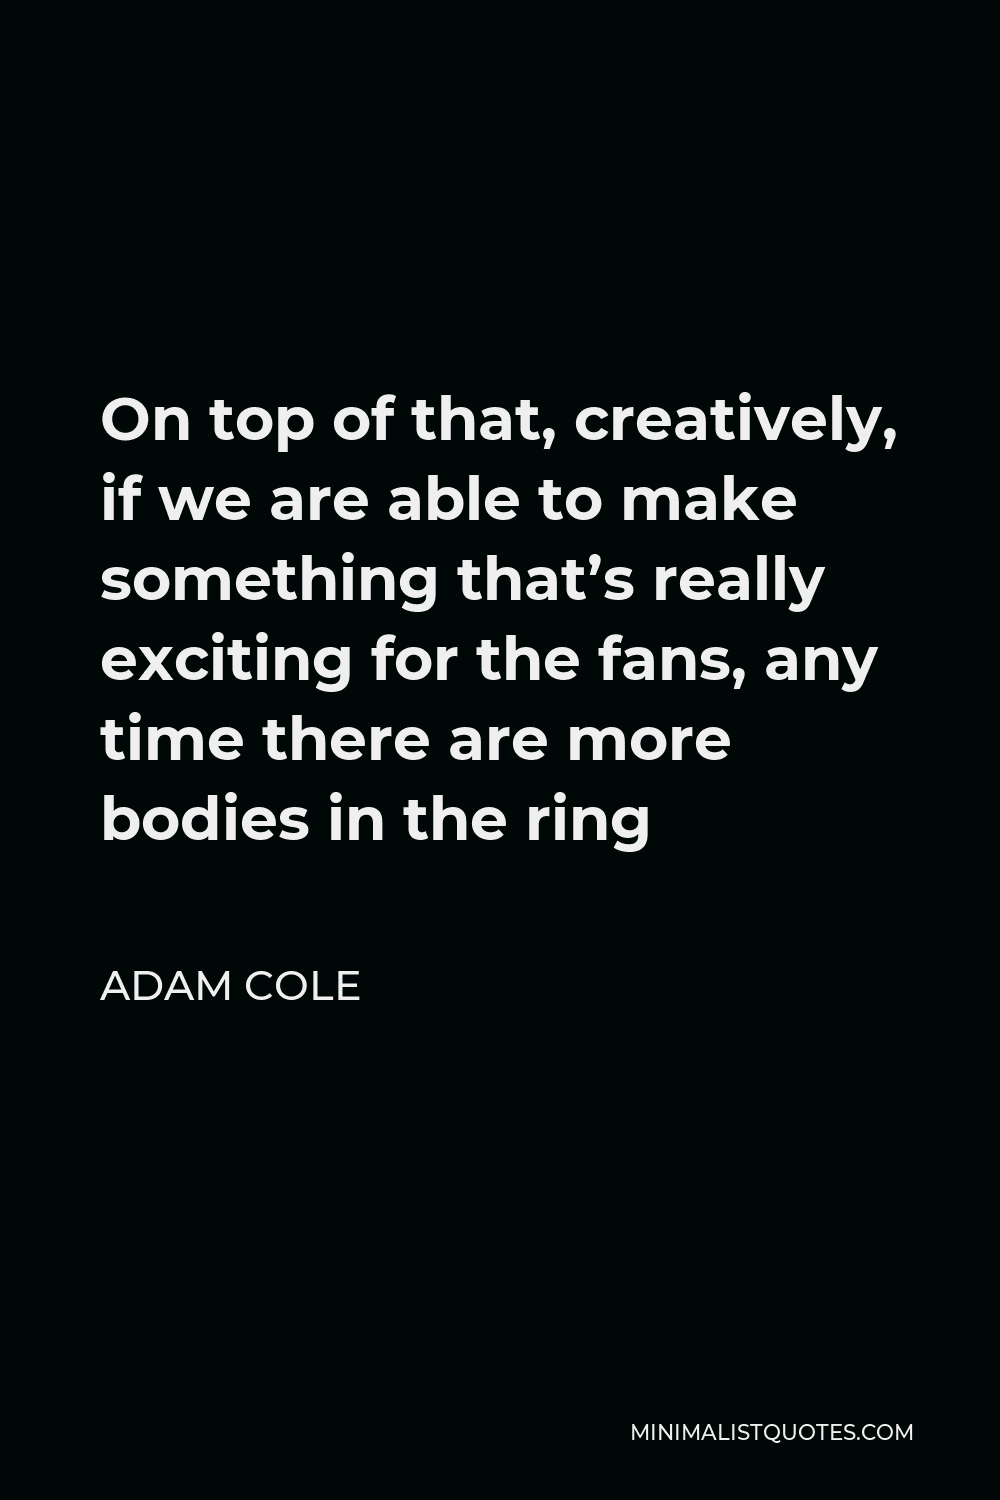 Adam Cole Quote - On top of that, creatively, if we are able to make something that’s really exciting for the fans, any time there are more bodies in the ring